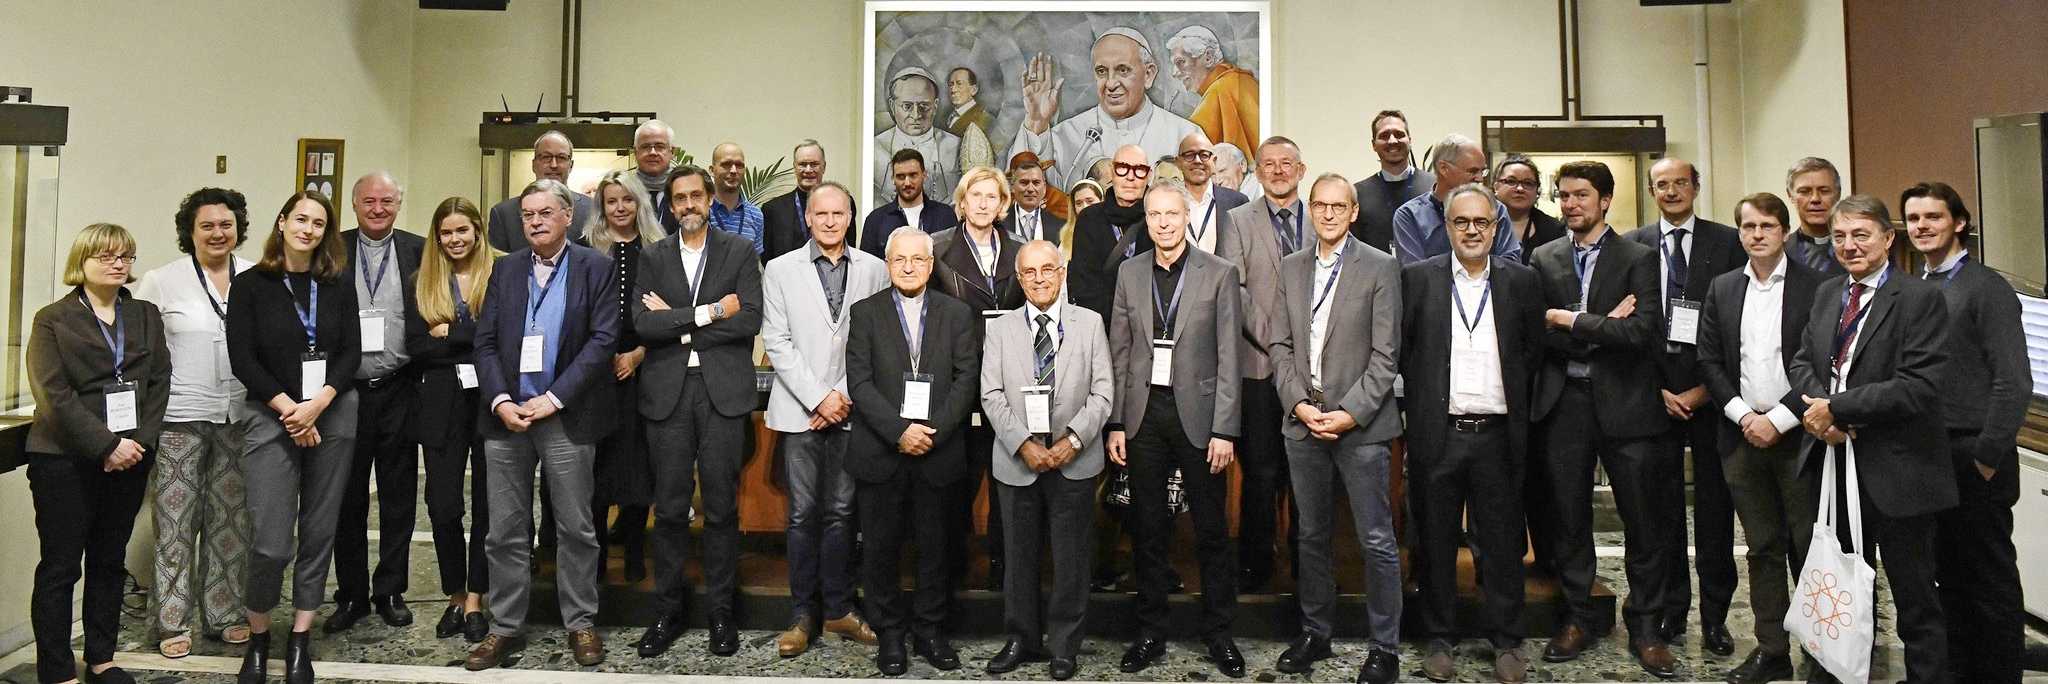 group photo of speakers at ICEEL conference